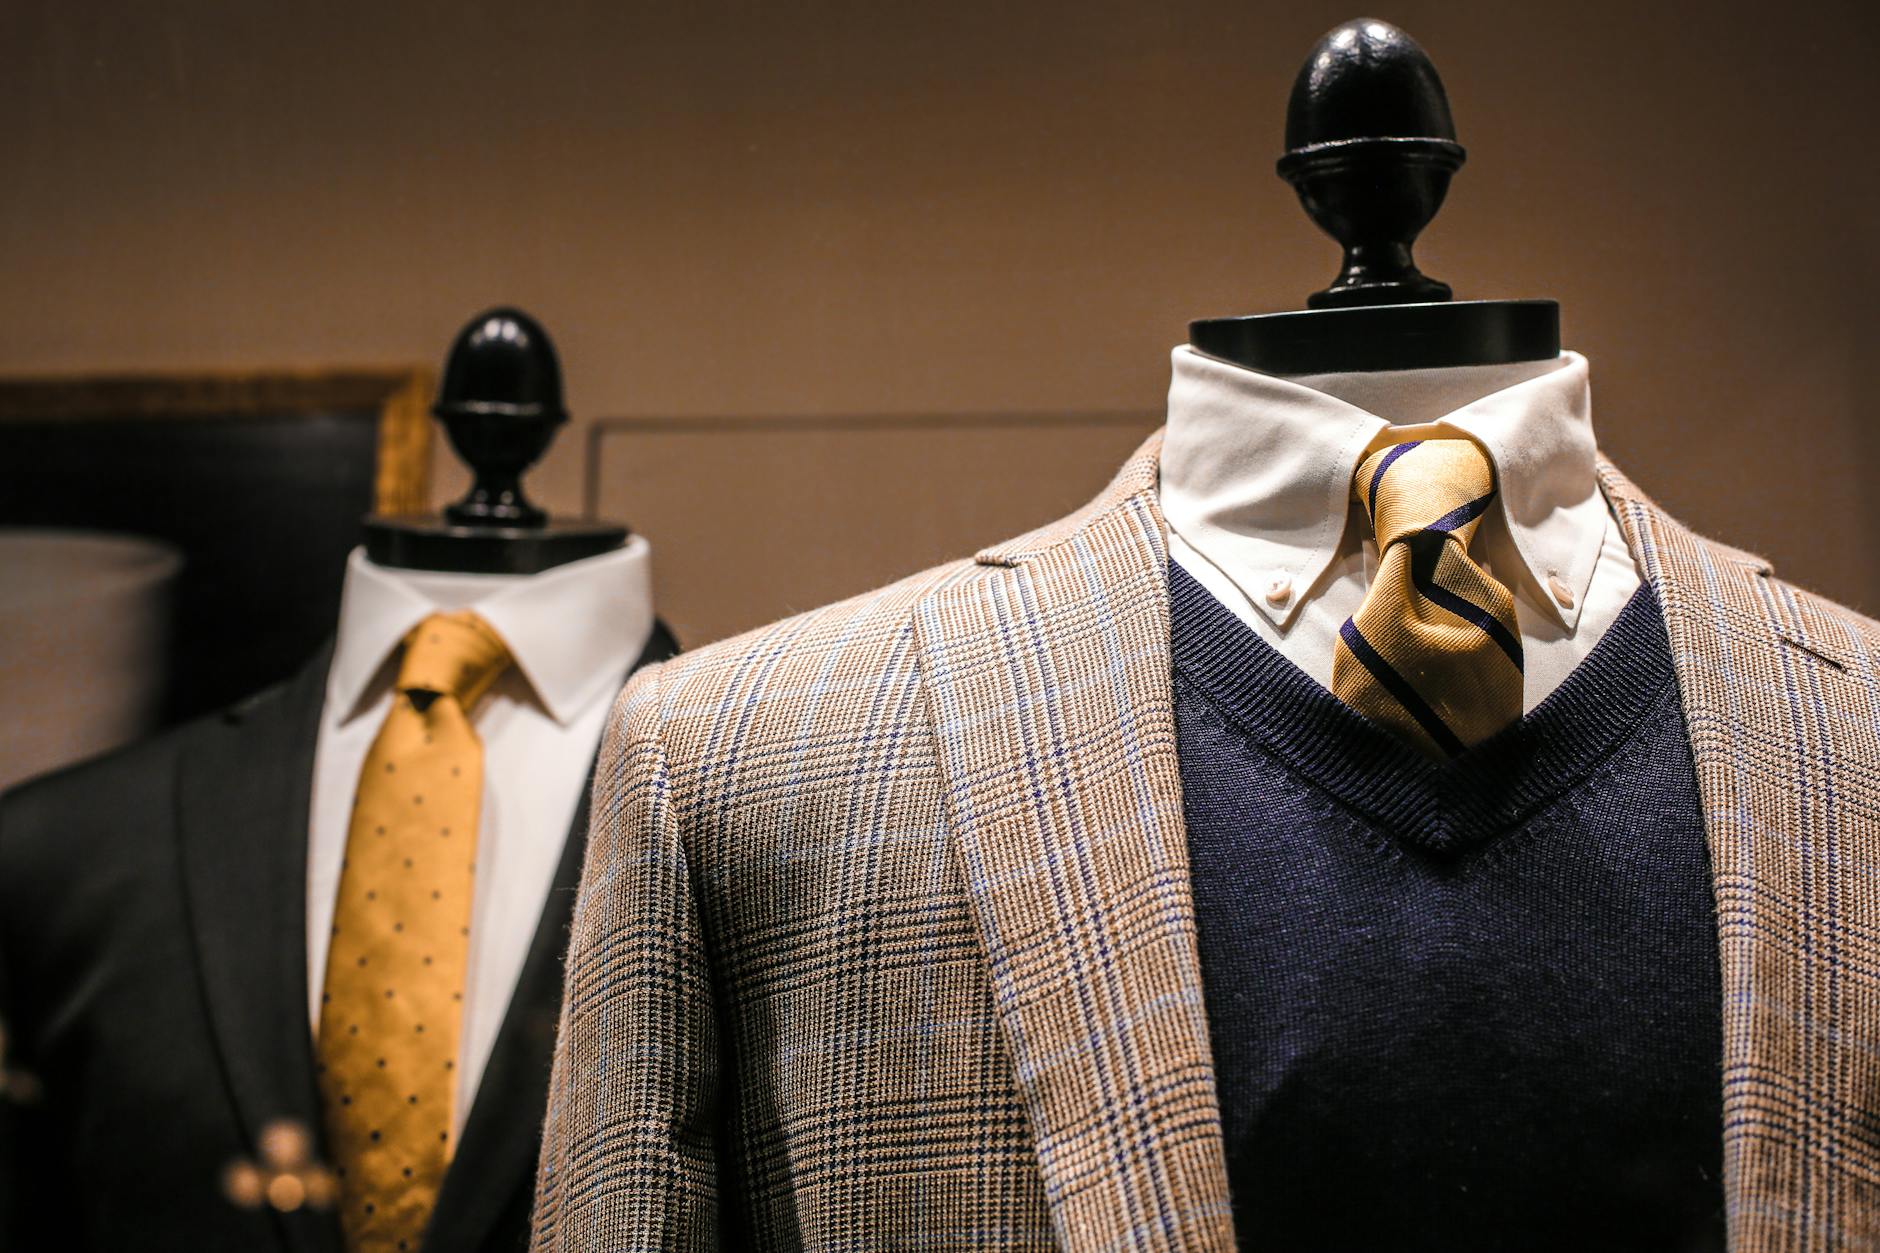 Dandy fancy jackets with shiny ties on dummies in showroom of contemporary male shop